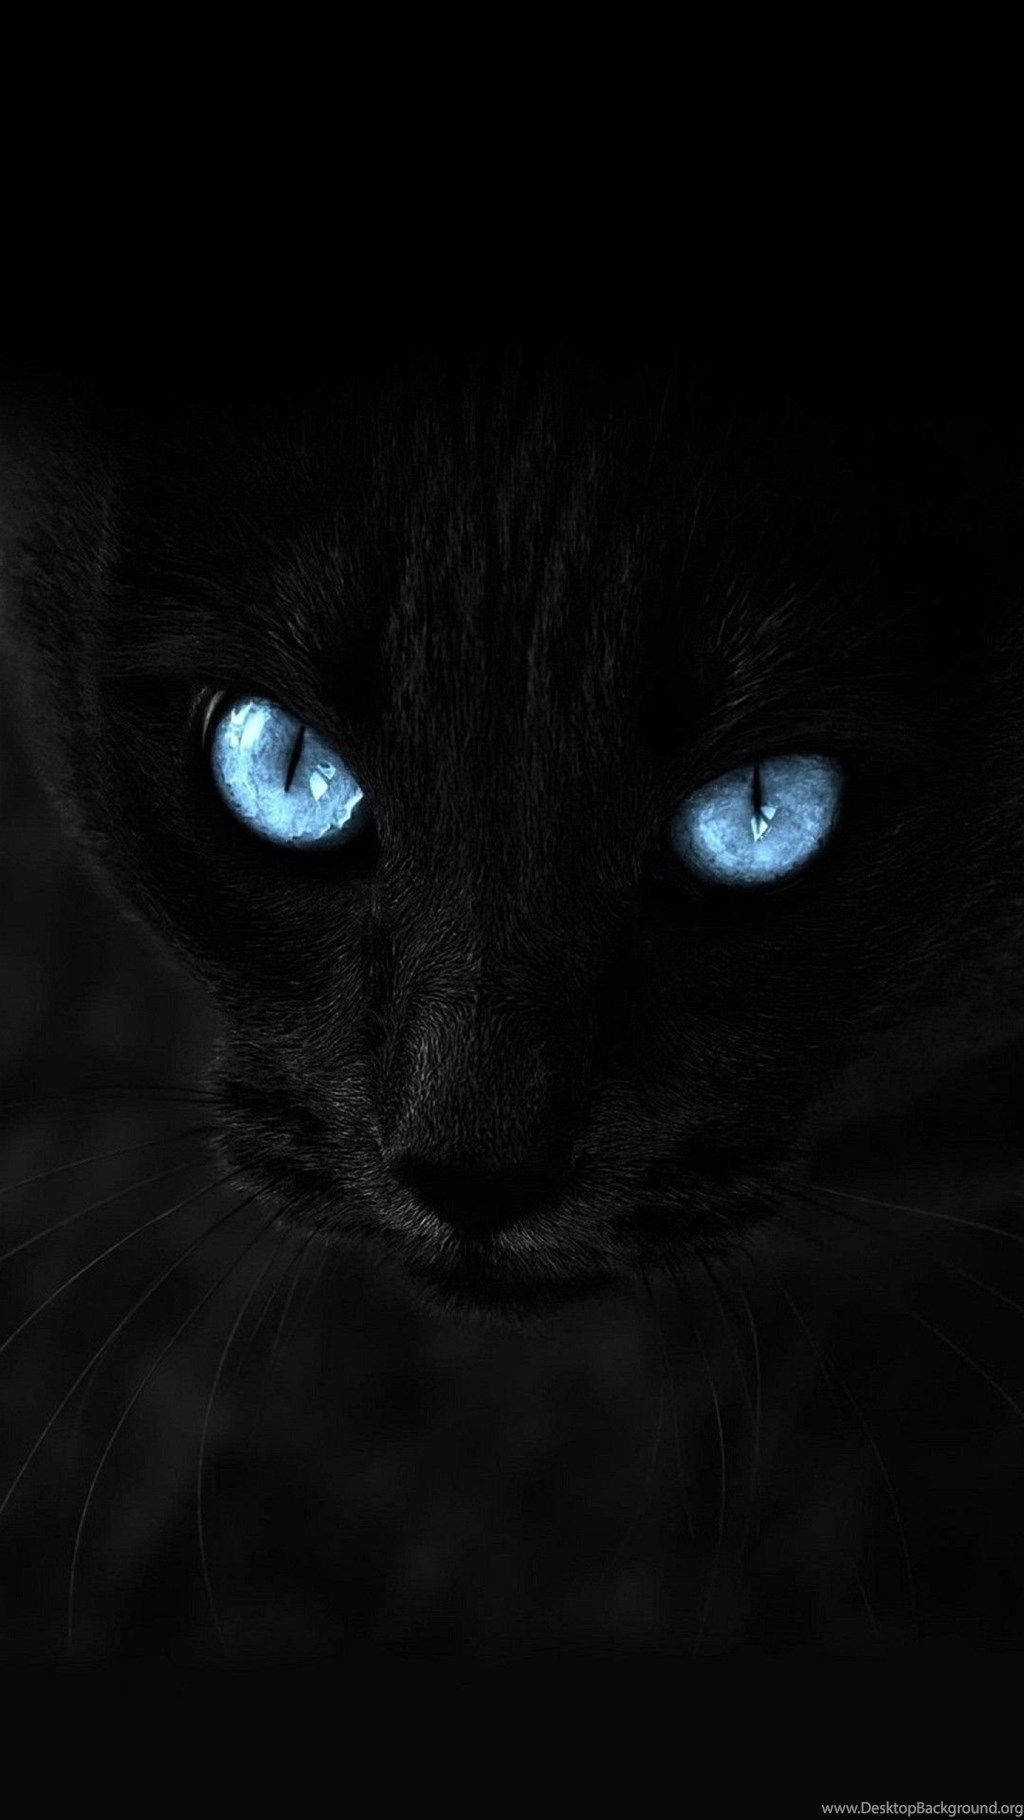 A Majestic Dark Cat With Blue Eyes For Your Iphone. Wallpaper